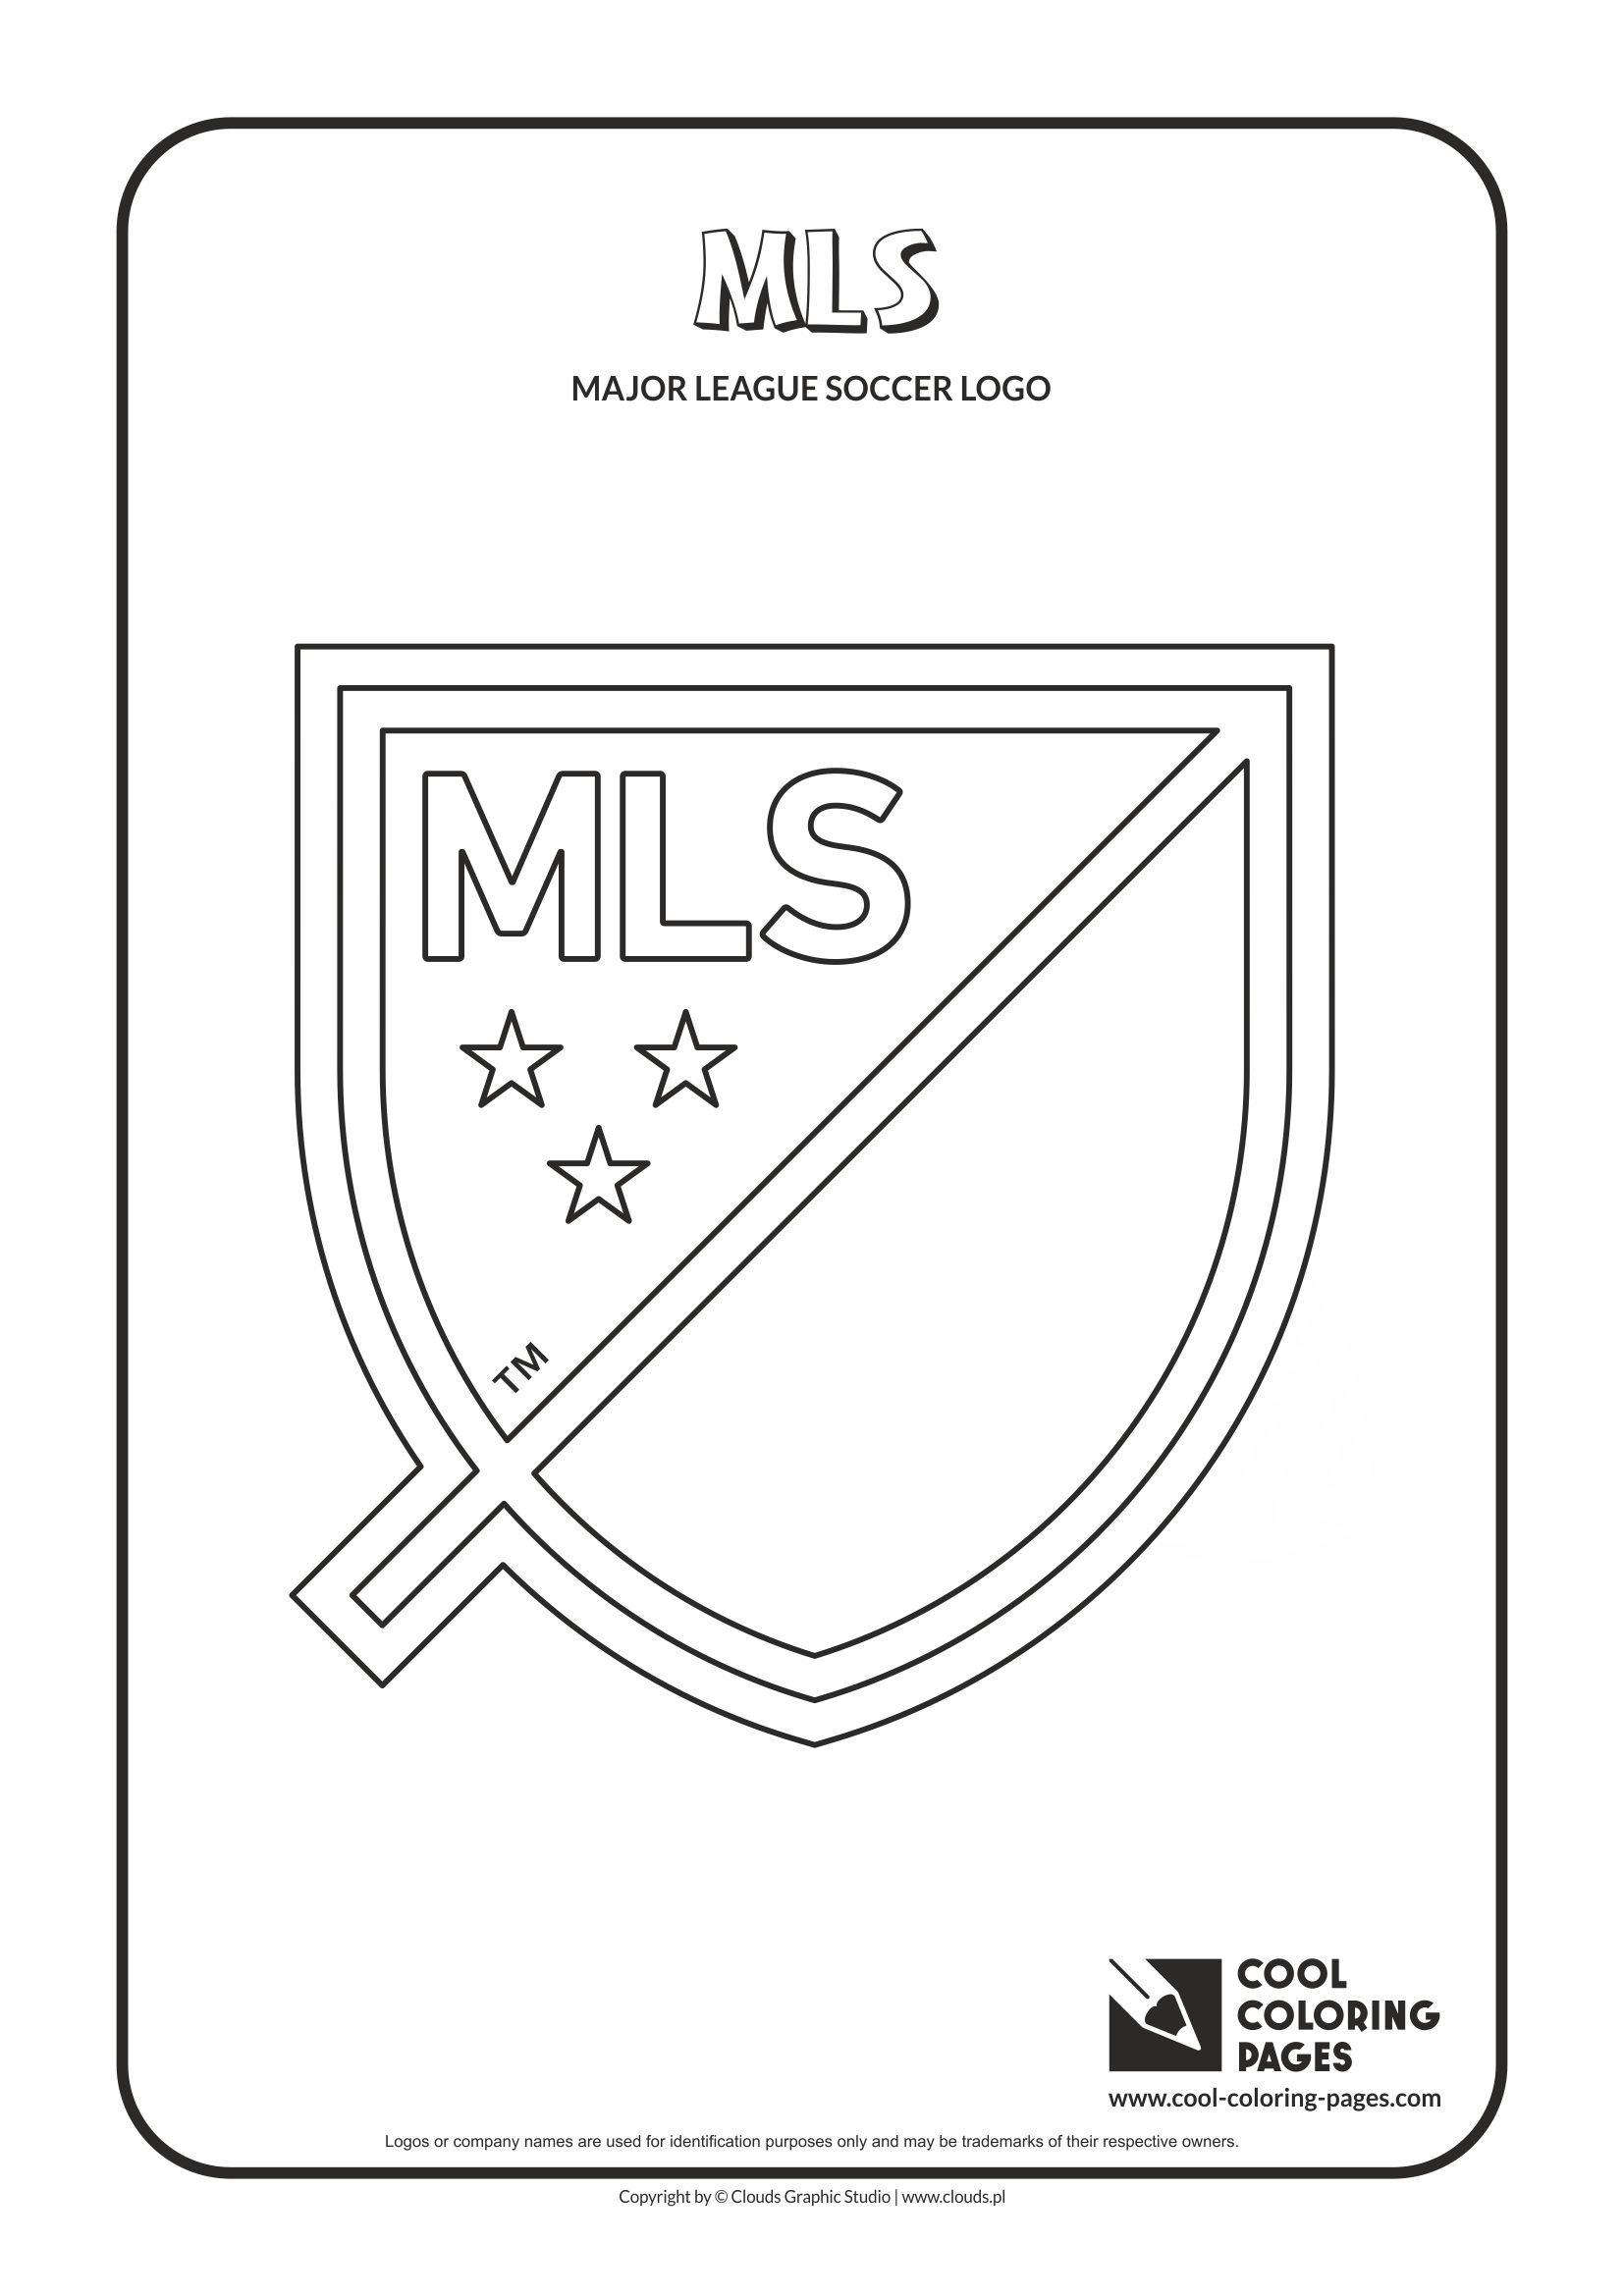 Download Cool Coloring Pages MLS soccer clubs logos coloring pages ...